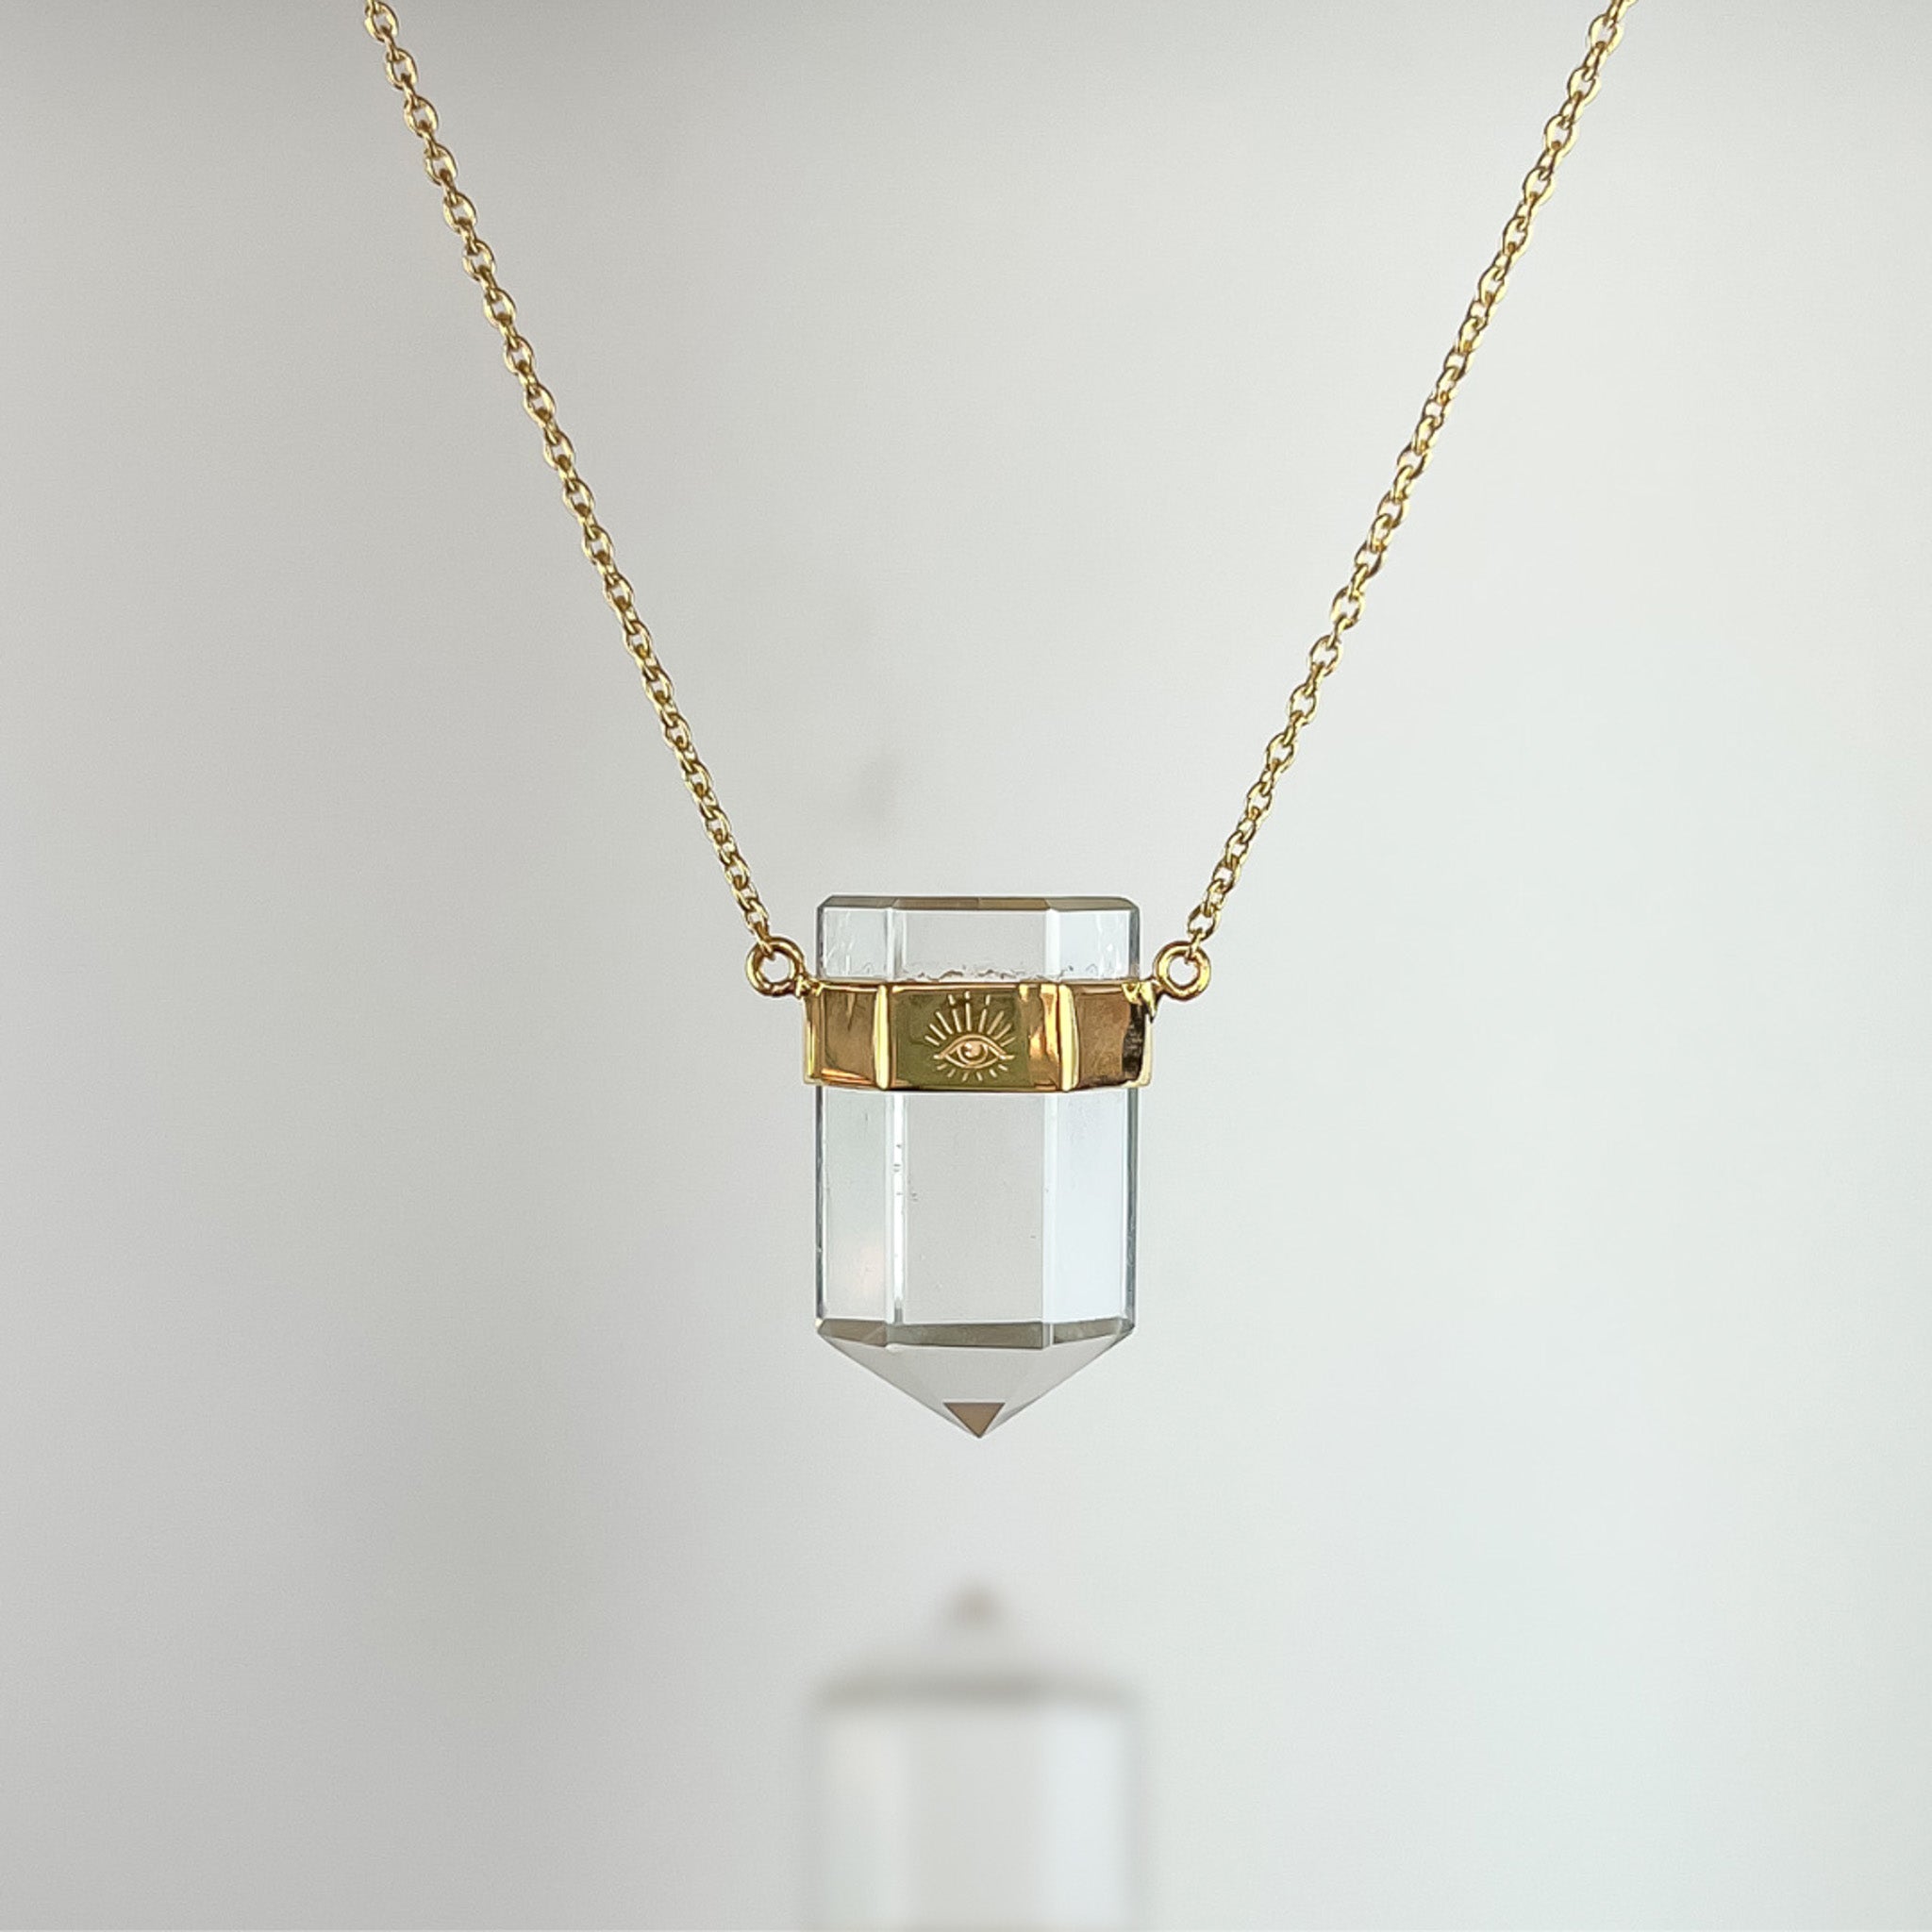 Guided By The Universe 14K Gold Clear Quartz Necklace